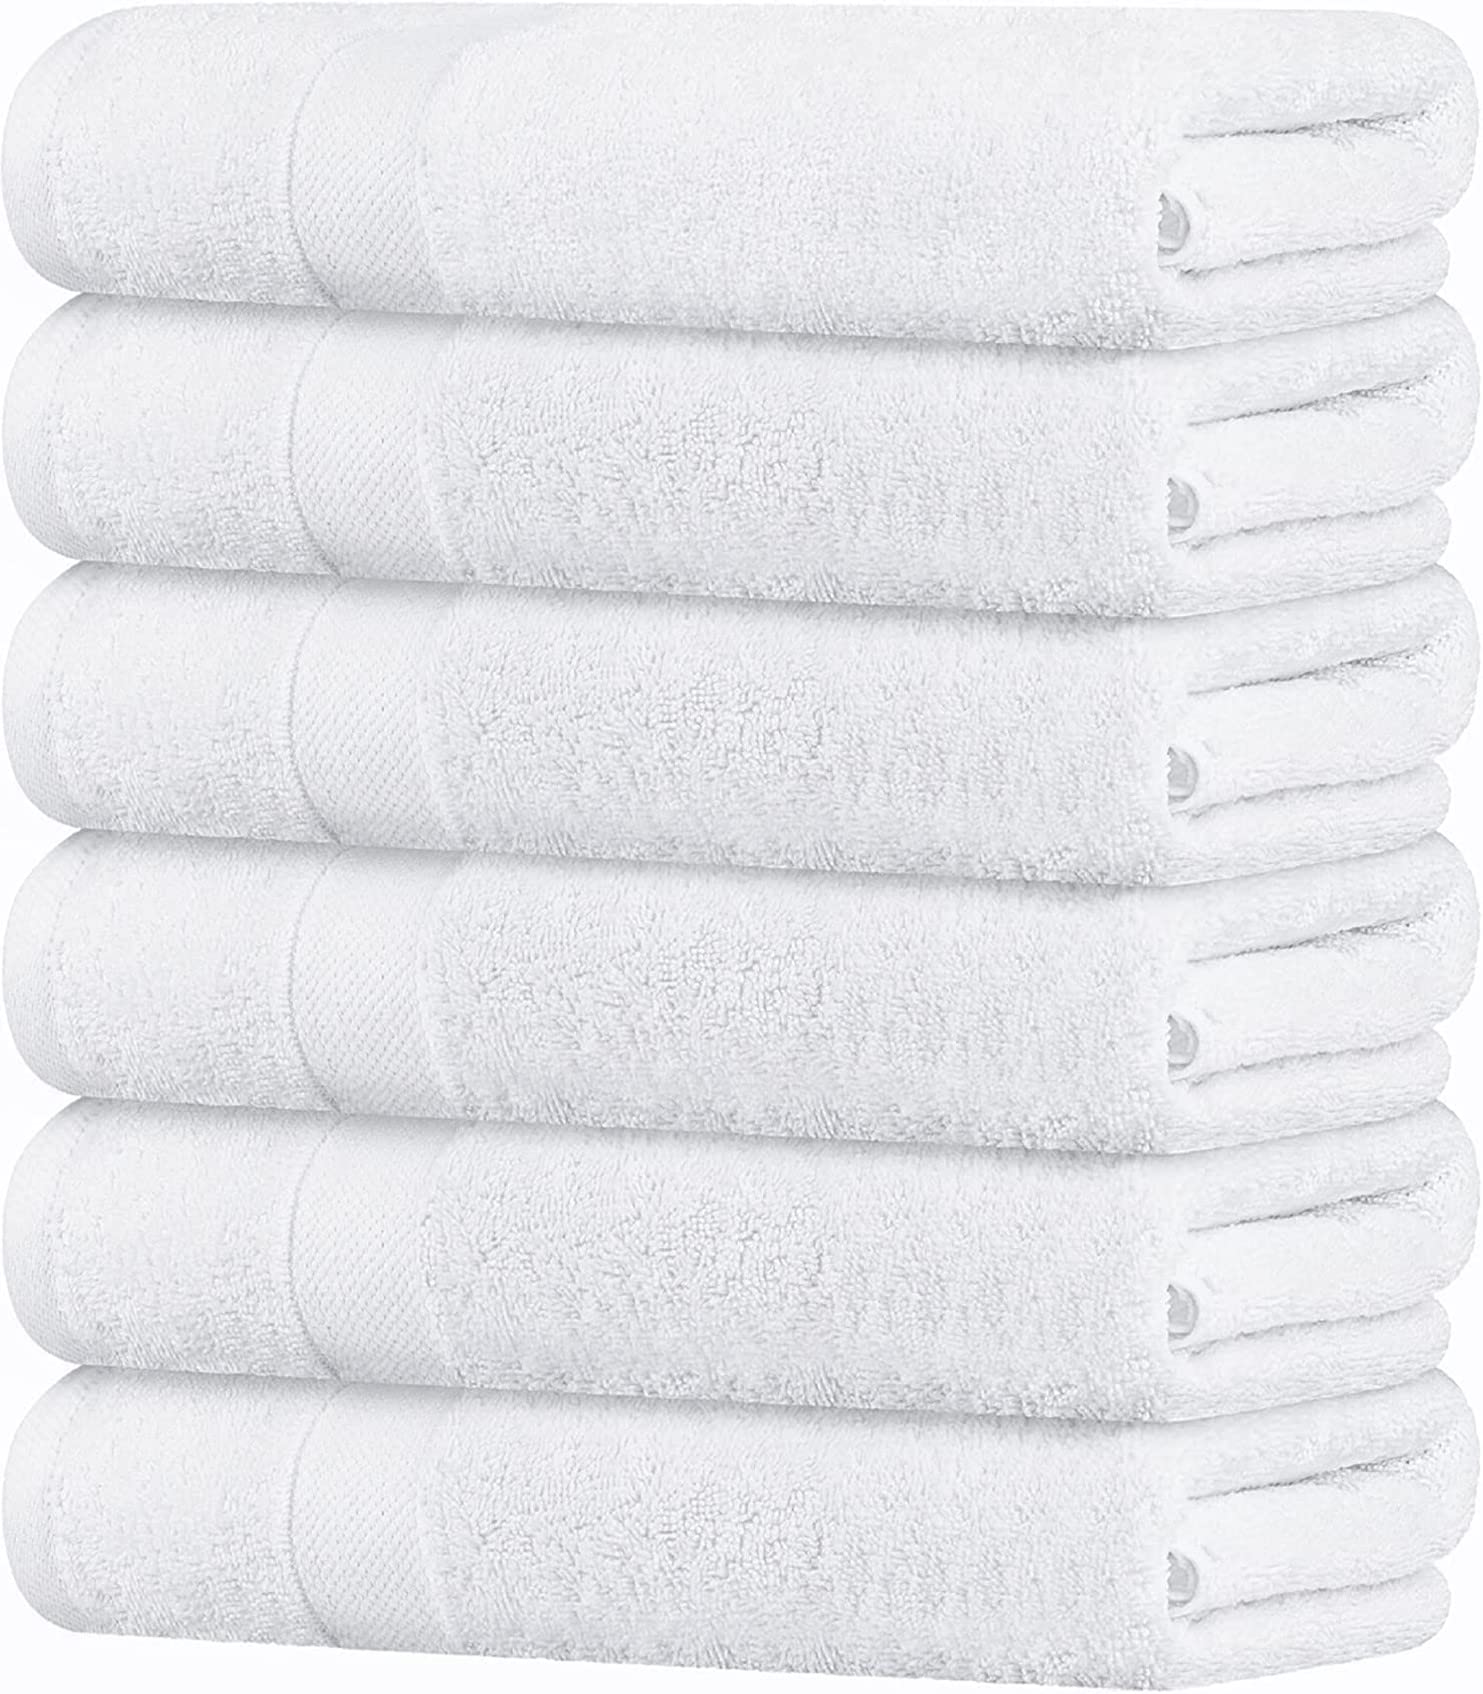 Wealuxe White Bath Towels 24x50 Inch, Cotton Towel Set for Bathroom, Hotel,  Gym, Spa, Soft Extra Absorbent Quick Dry 6 Pack White 24x50 Inch - Medium